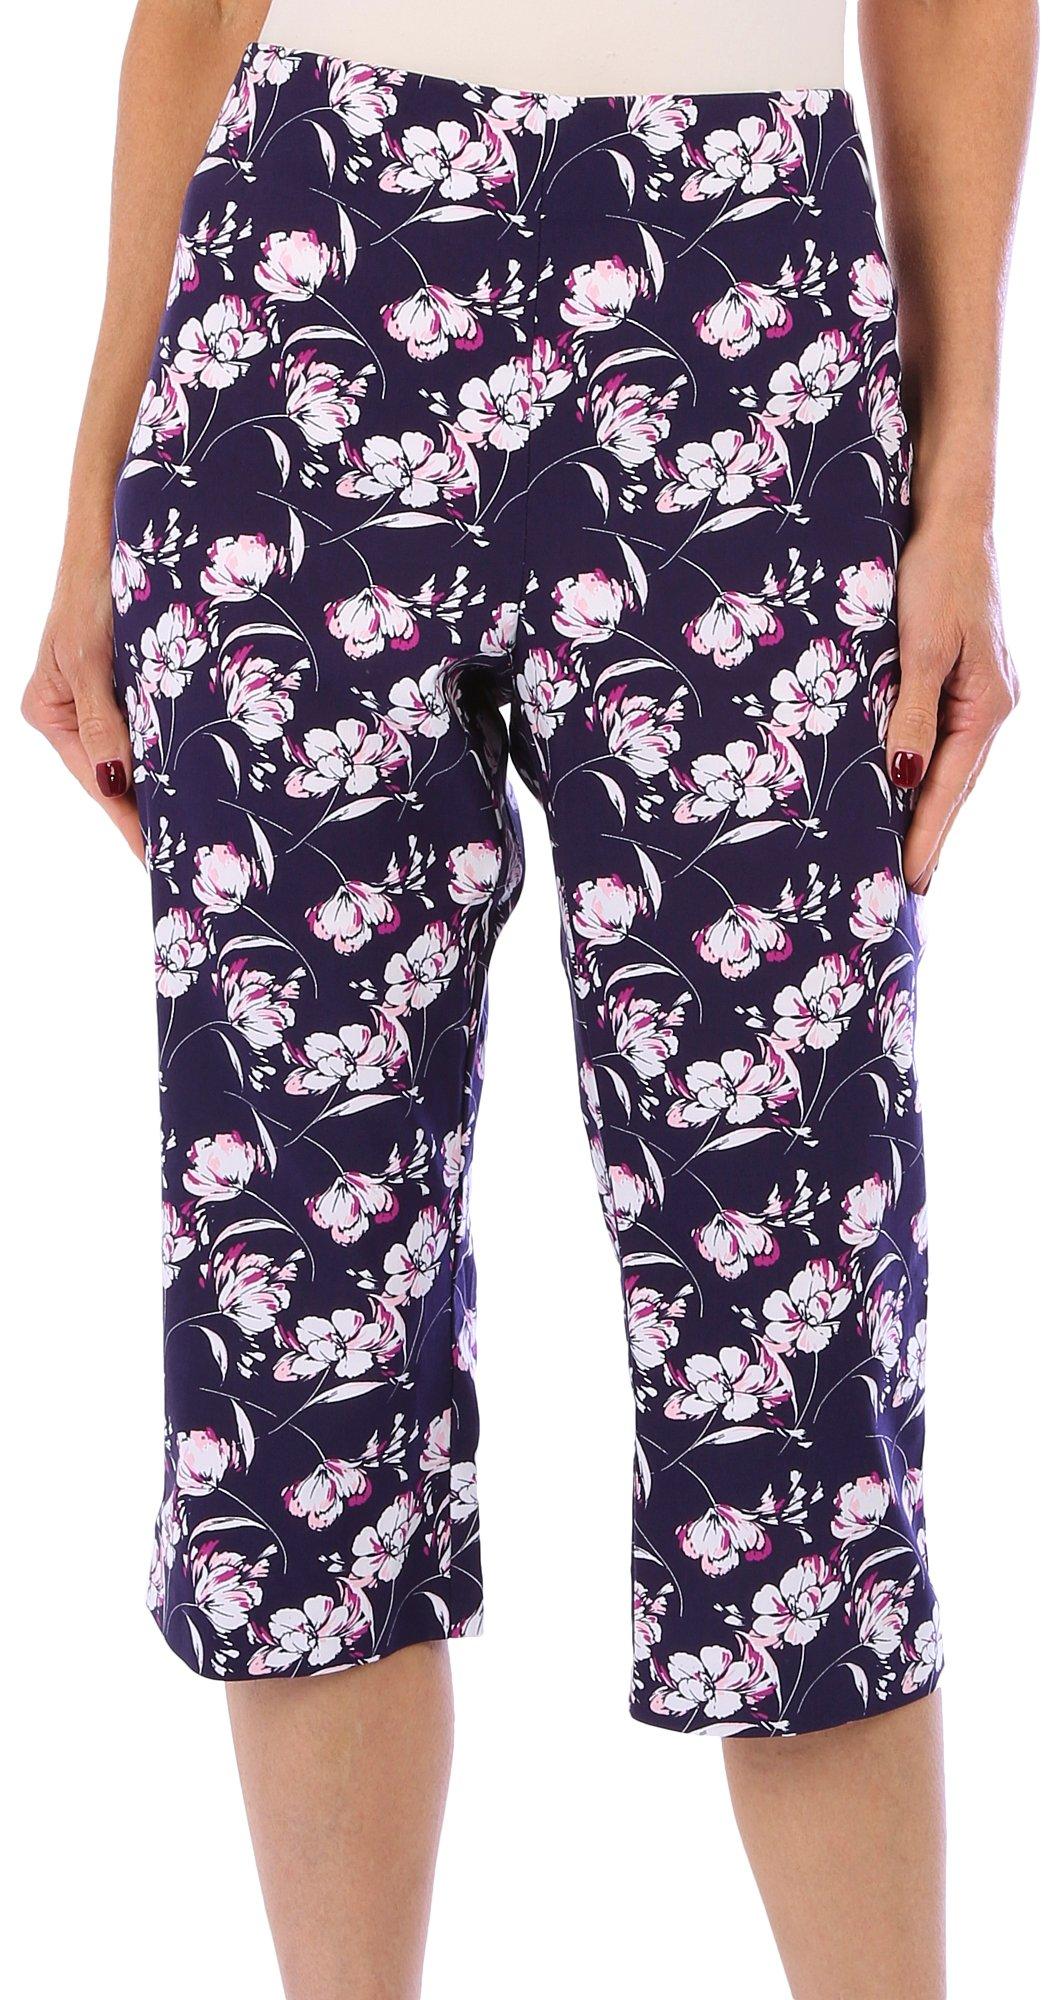 Counterparts Petite 19 in. Floral Print Pull-On Capris